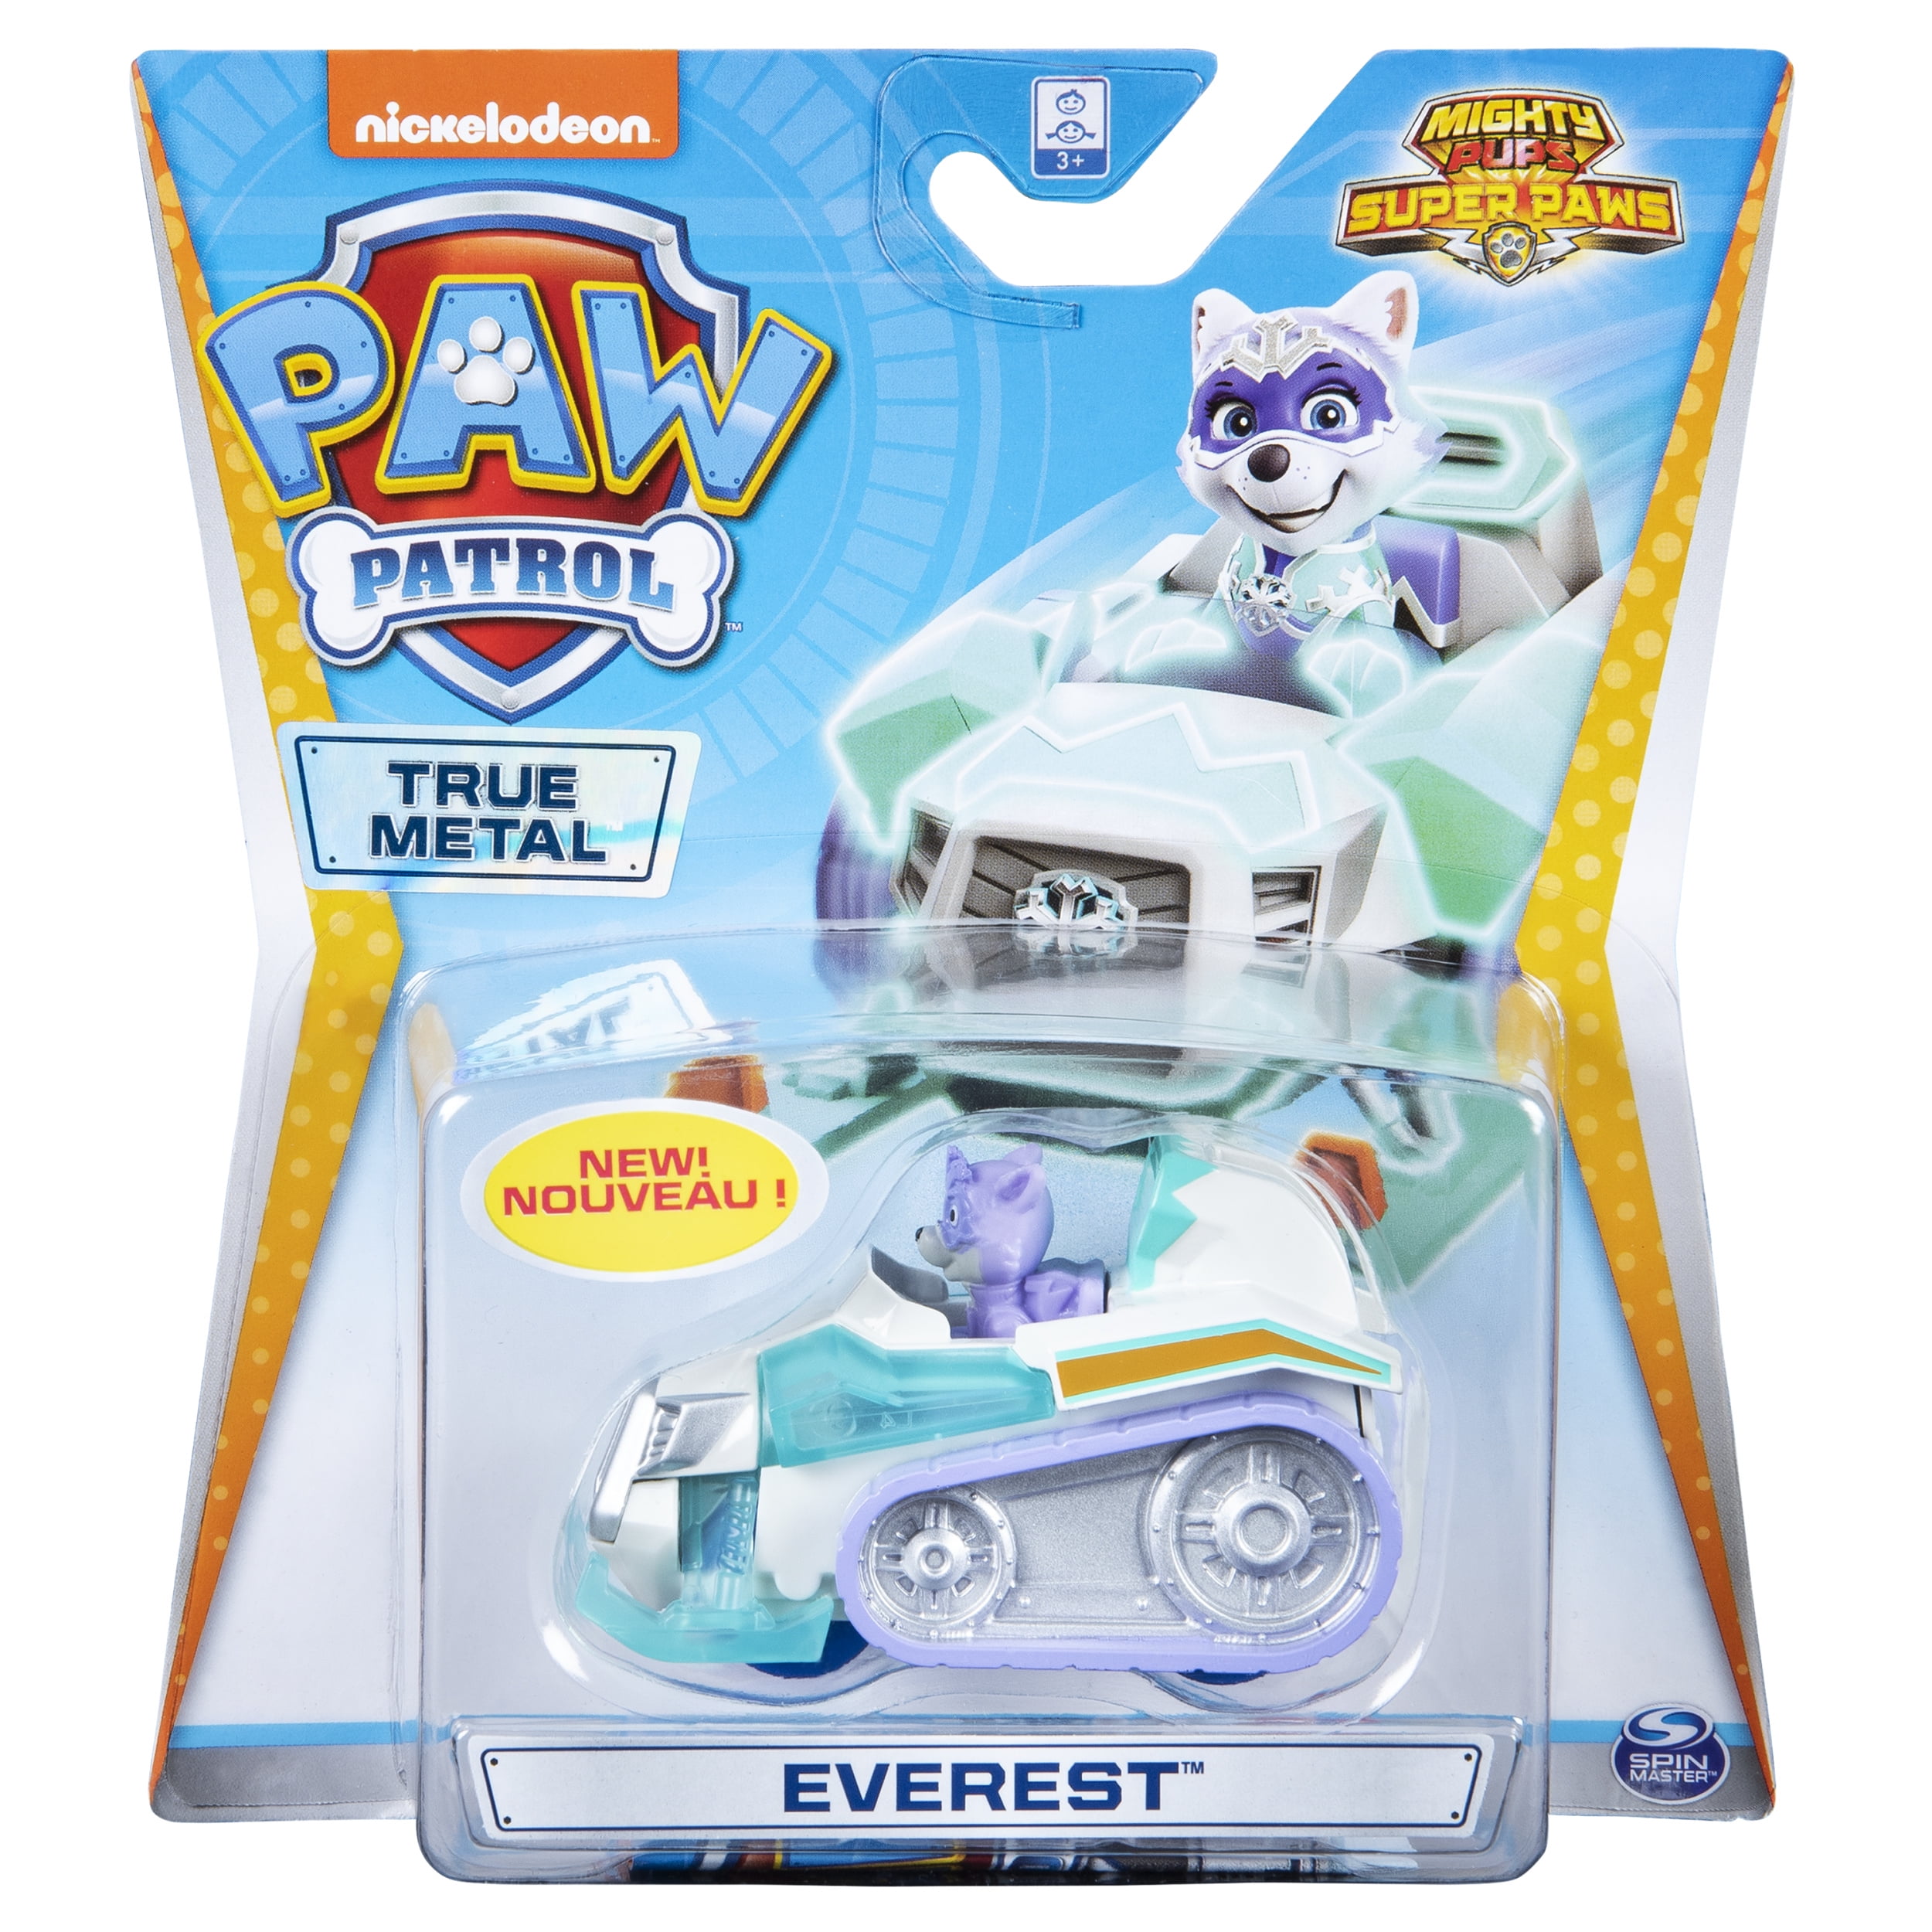 PAW Patrol, Metal Mighty Everest Super PAWs Collectible Vehicle, Classic Series 1:55 Scale - Walmart.com